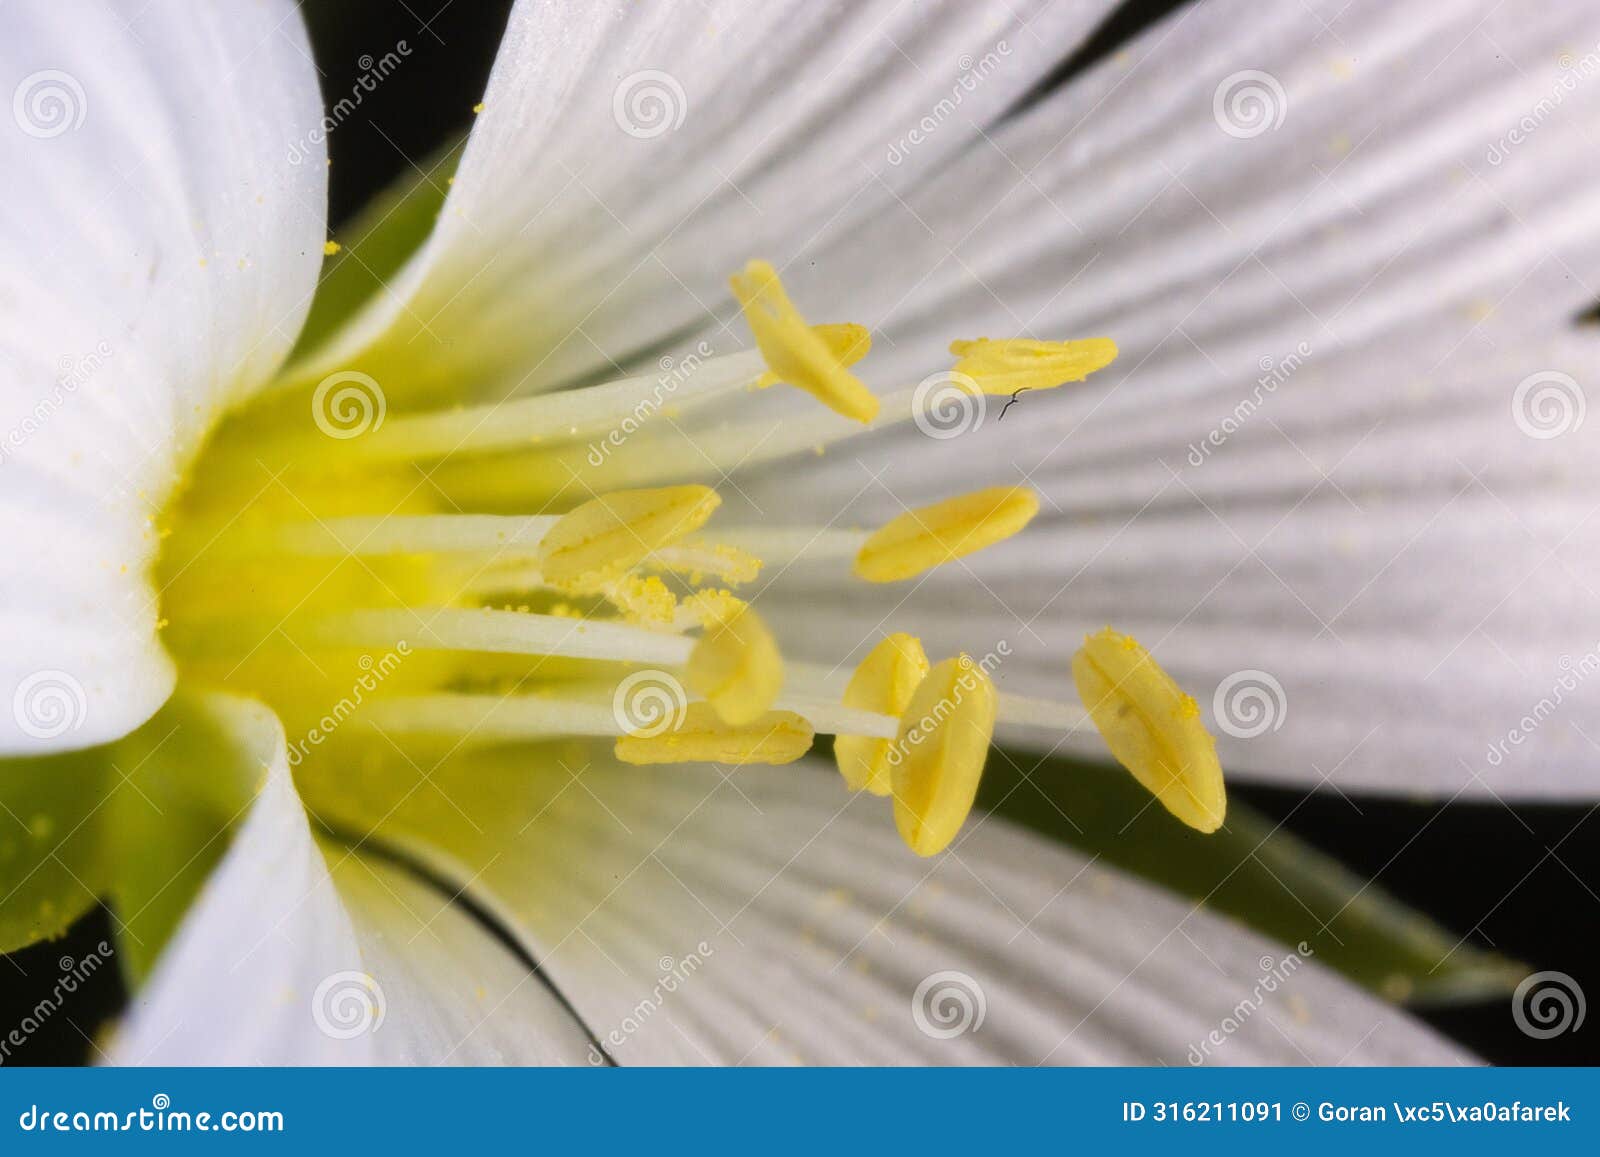 close-up of the flower of stellaria holostea